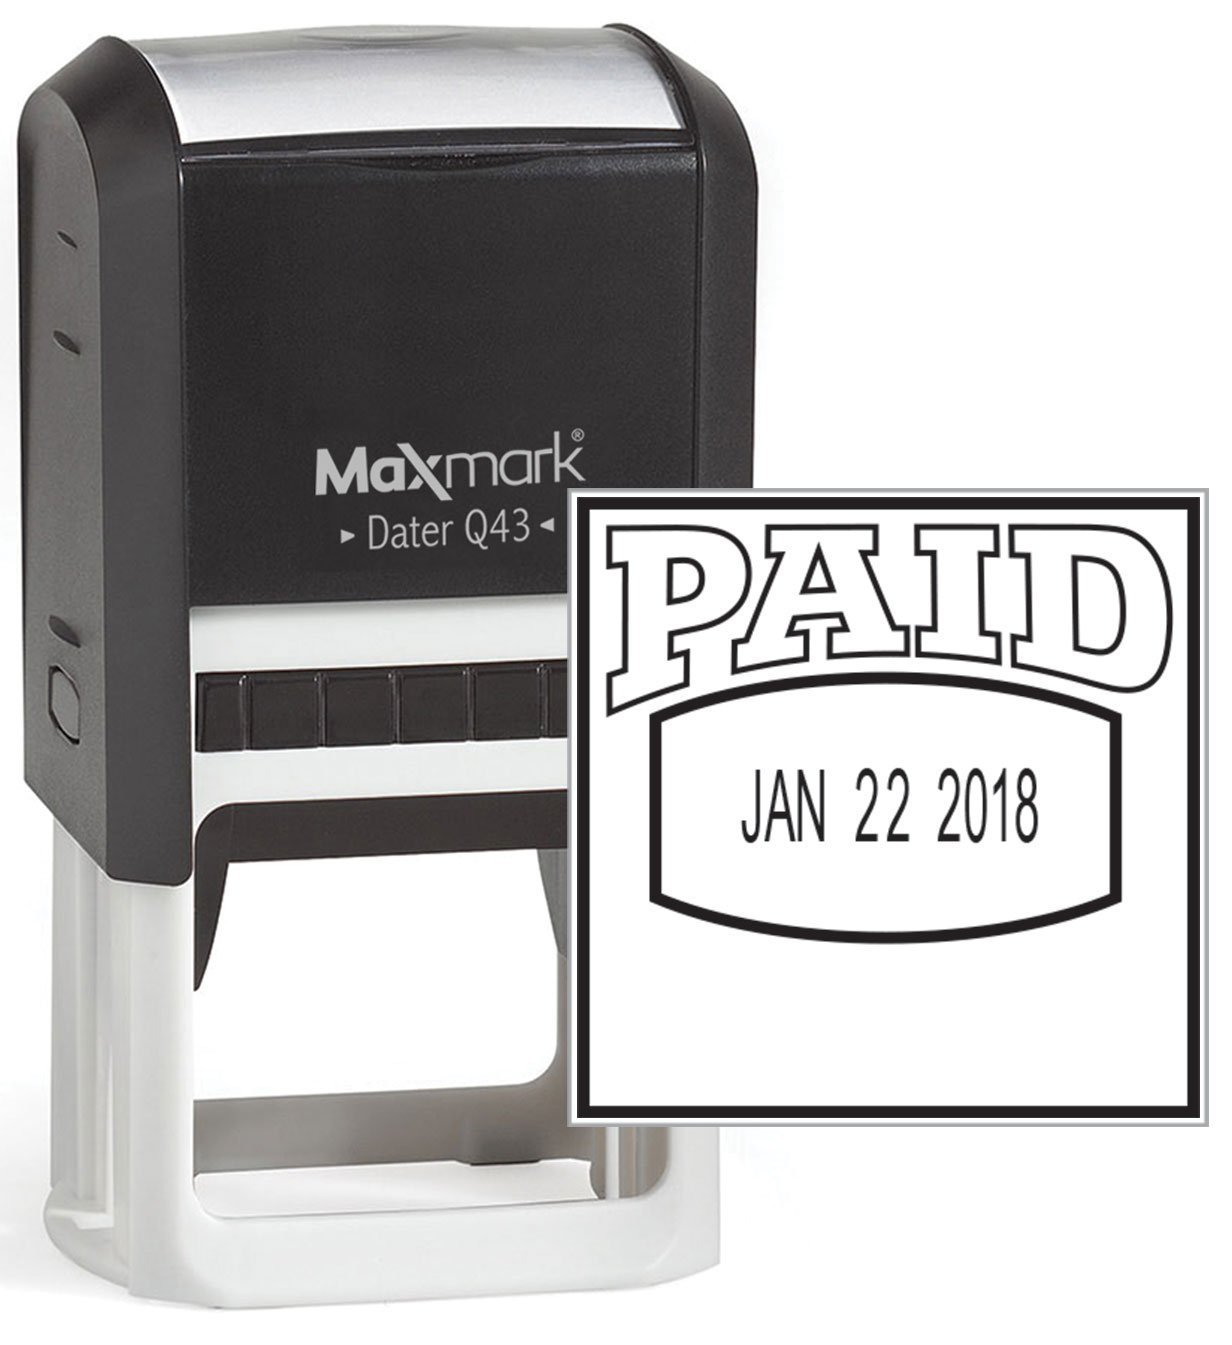 MaxMark Q43 (Large Size) Date Stamp with "PAID" Self Inking Stamp - Black Ink